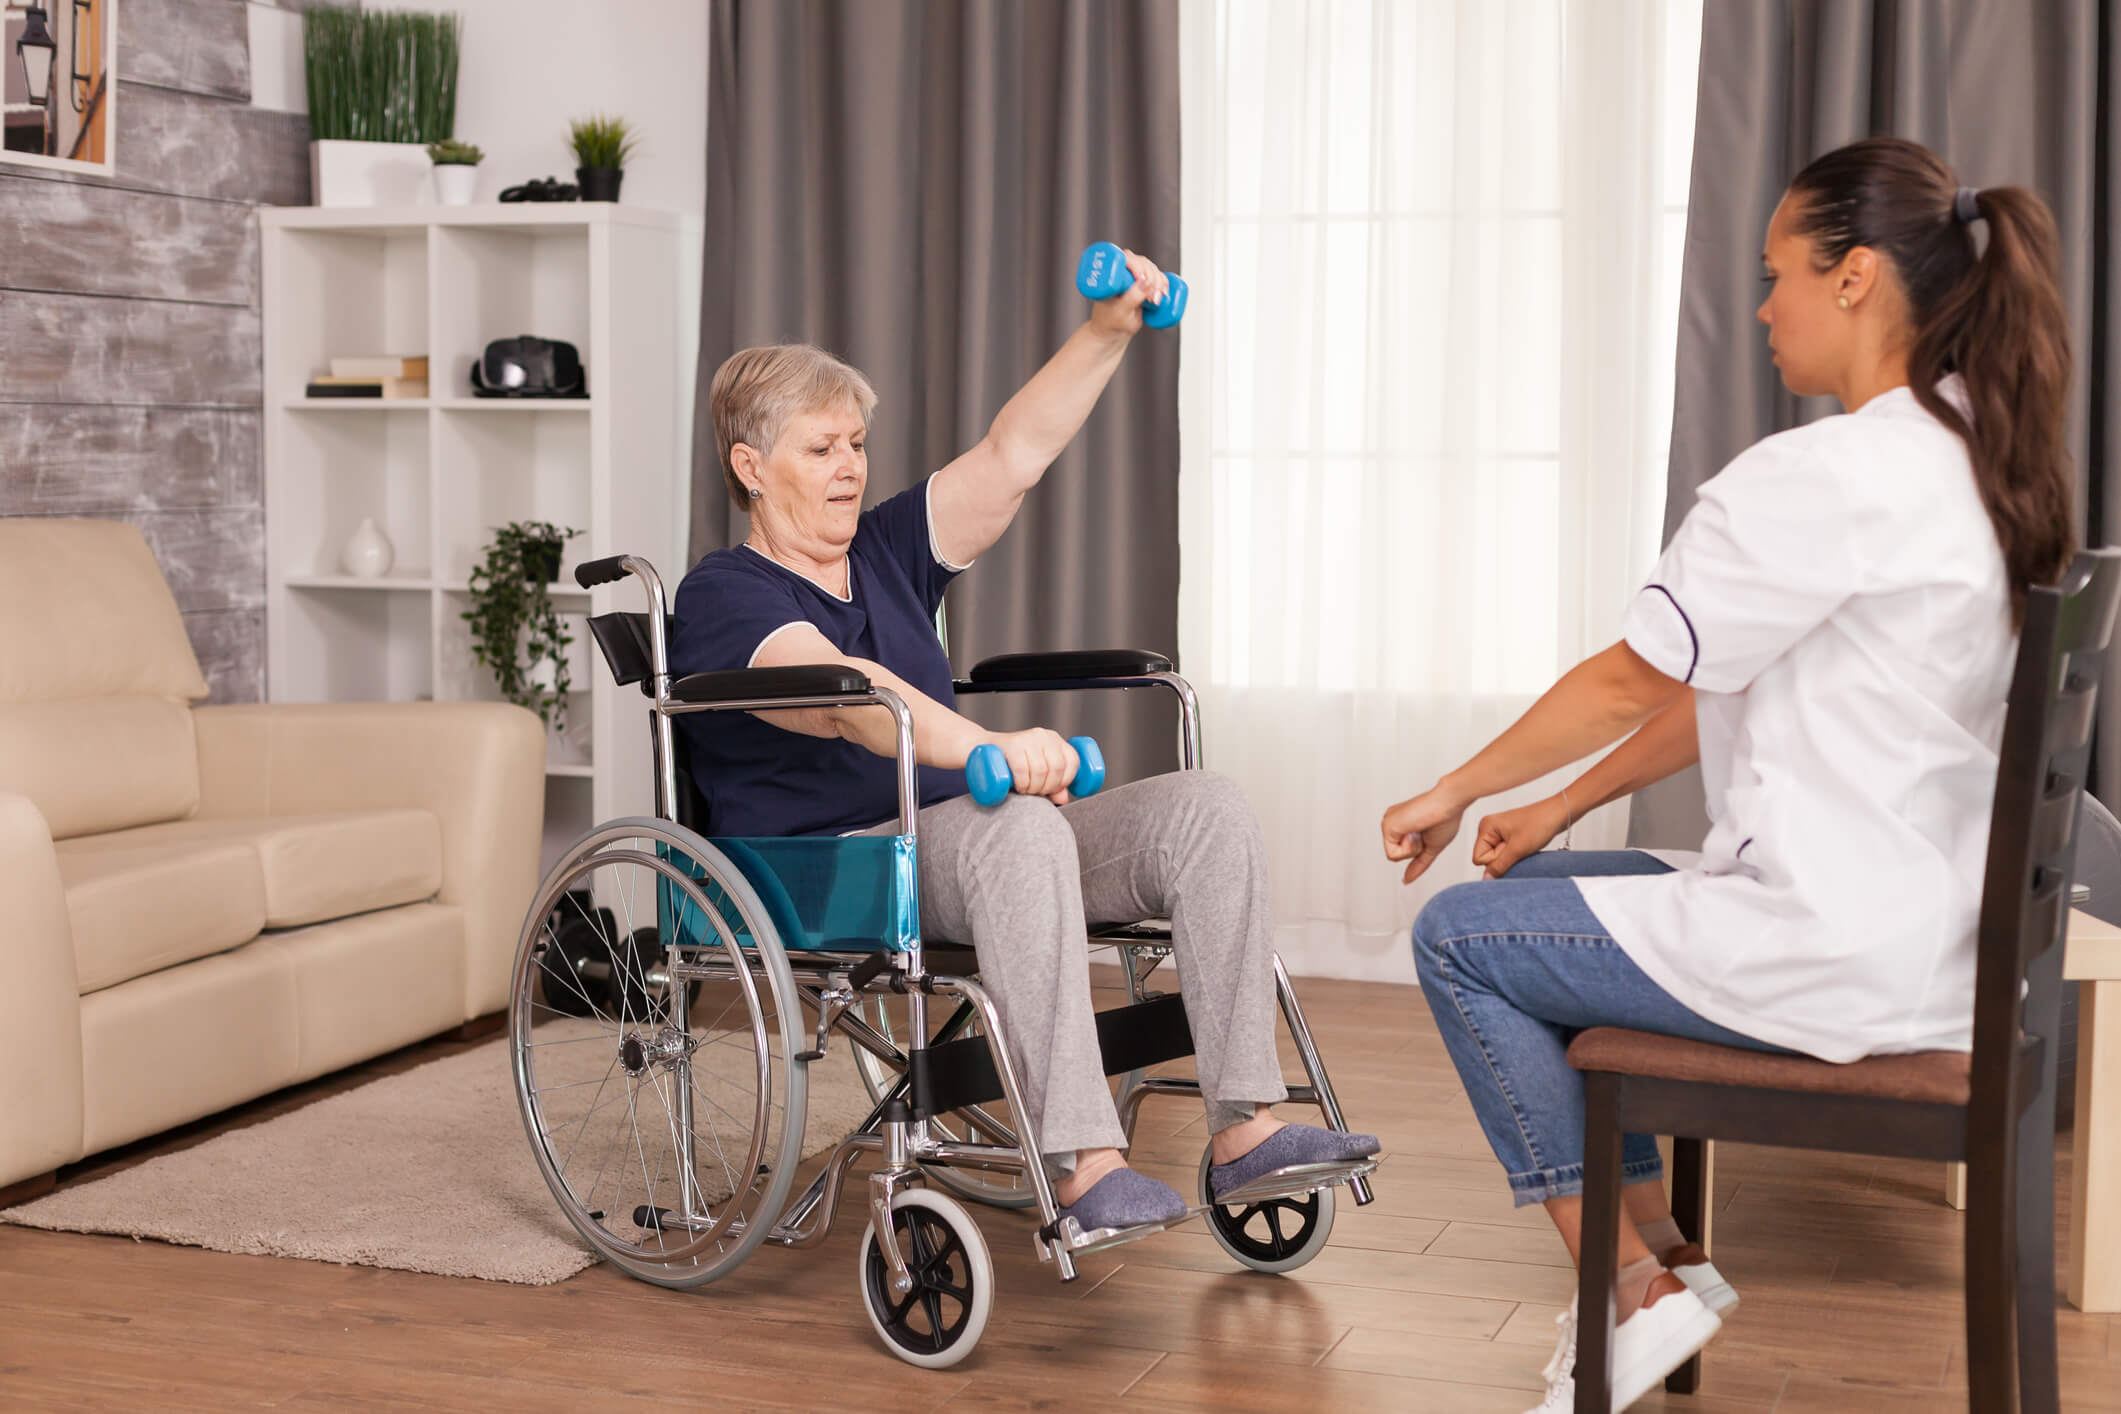 The Role of Occupational and Physical Therapy in Using Mobility Aids